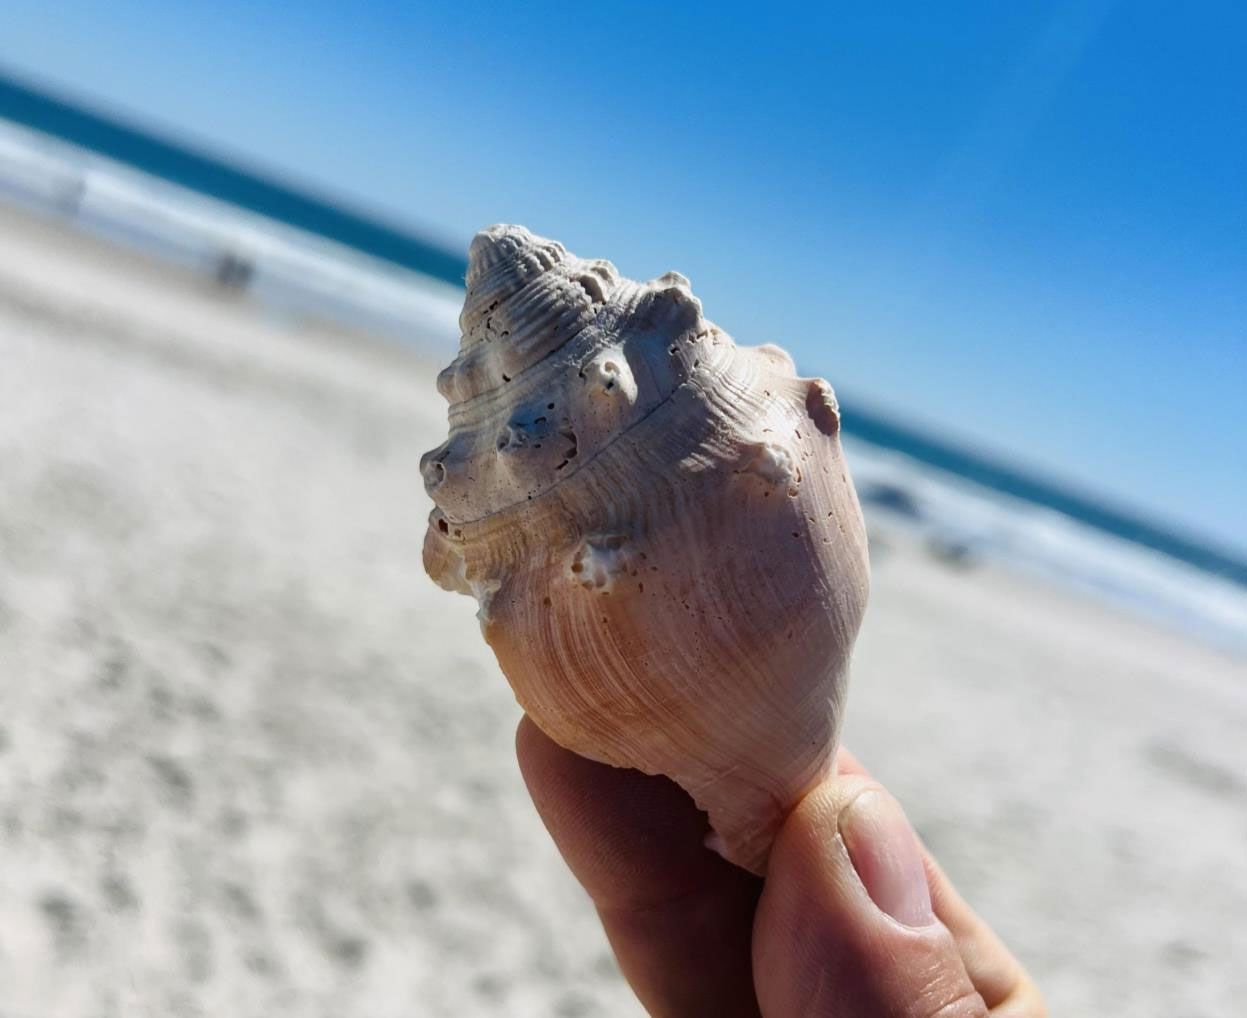 Seashells that have been discovered along the coasts of Topsail Island